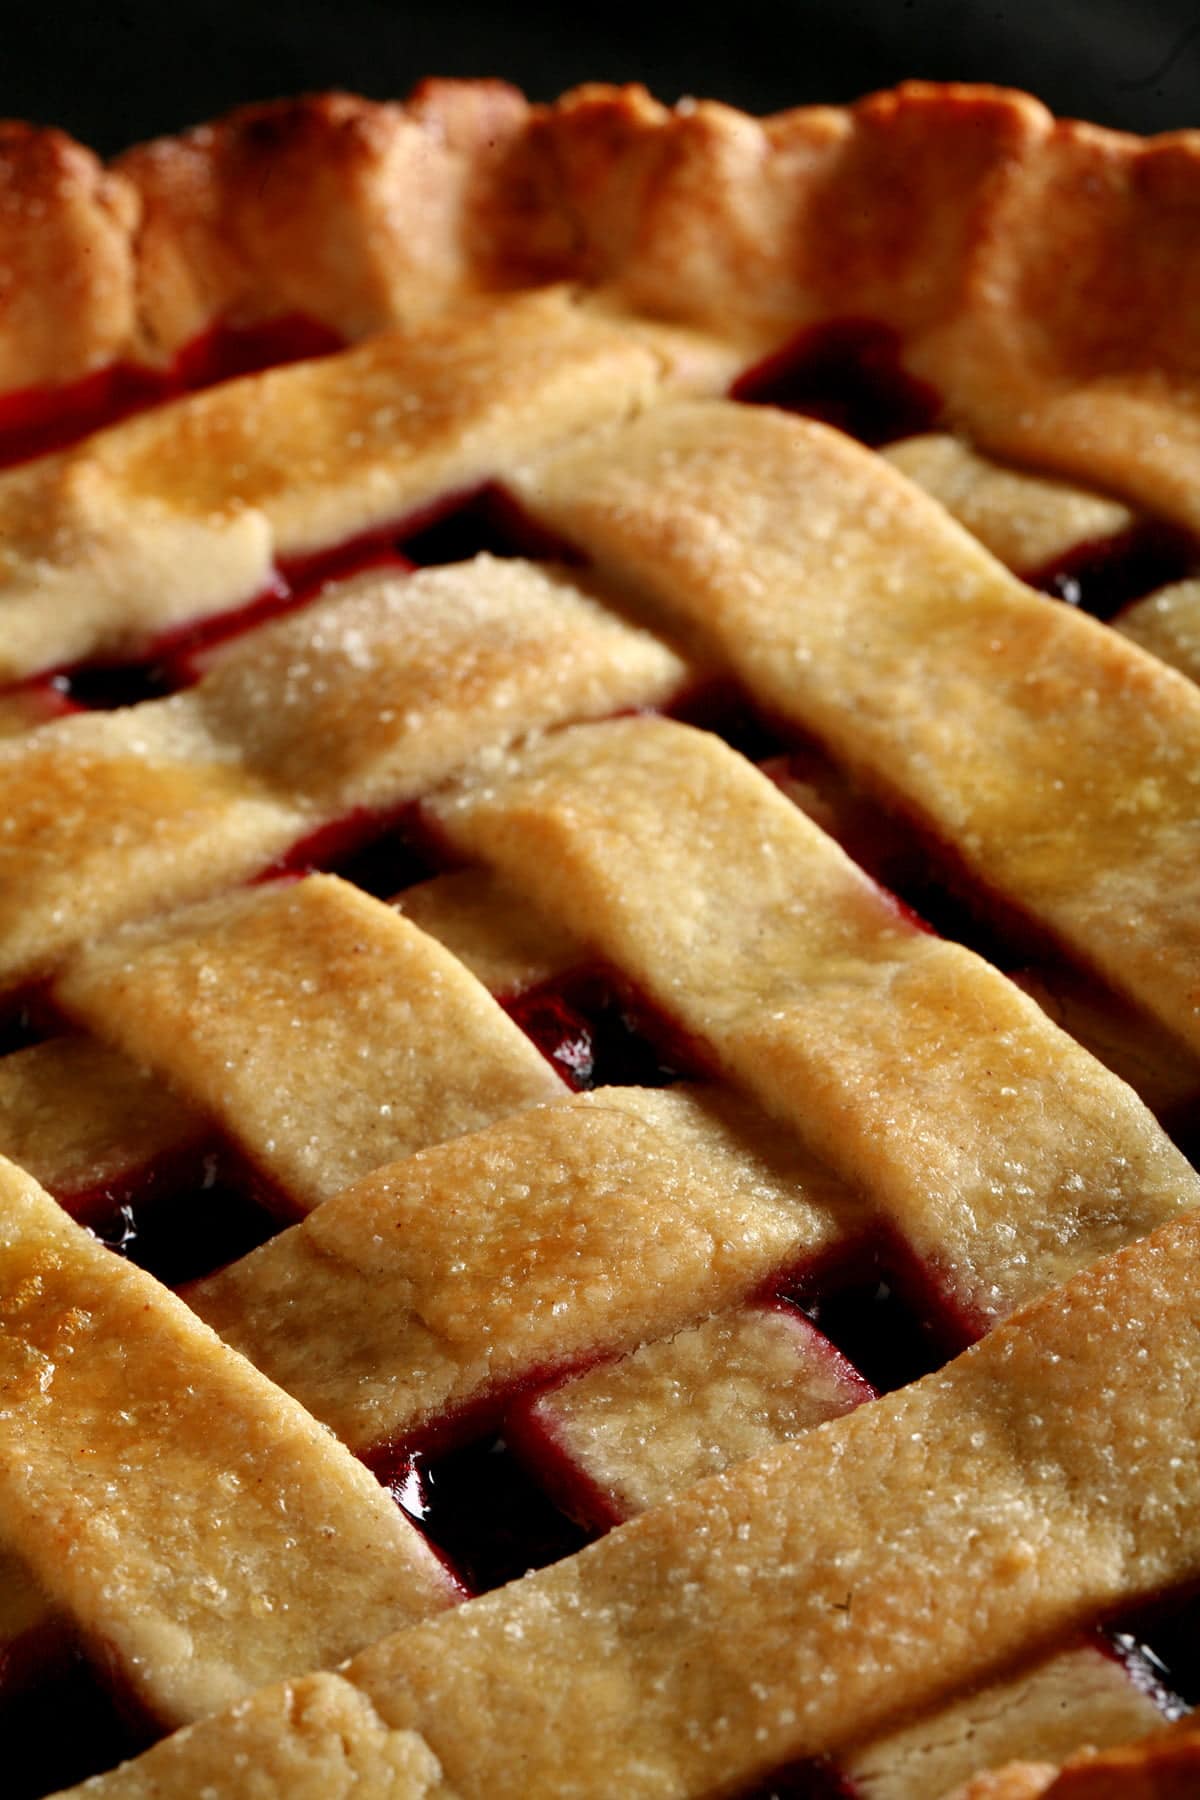 A close up view of a partridgeberry pie with a lattice crust.